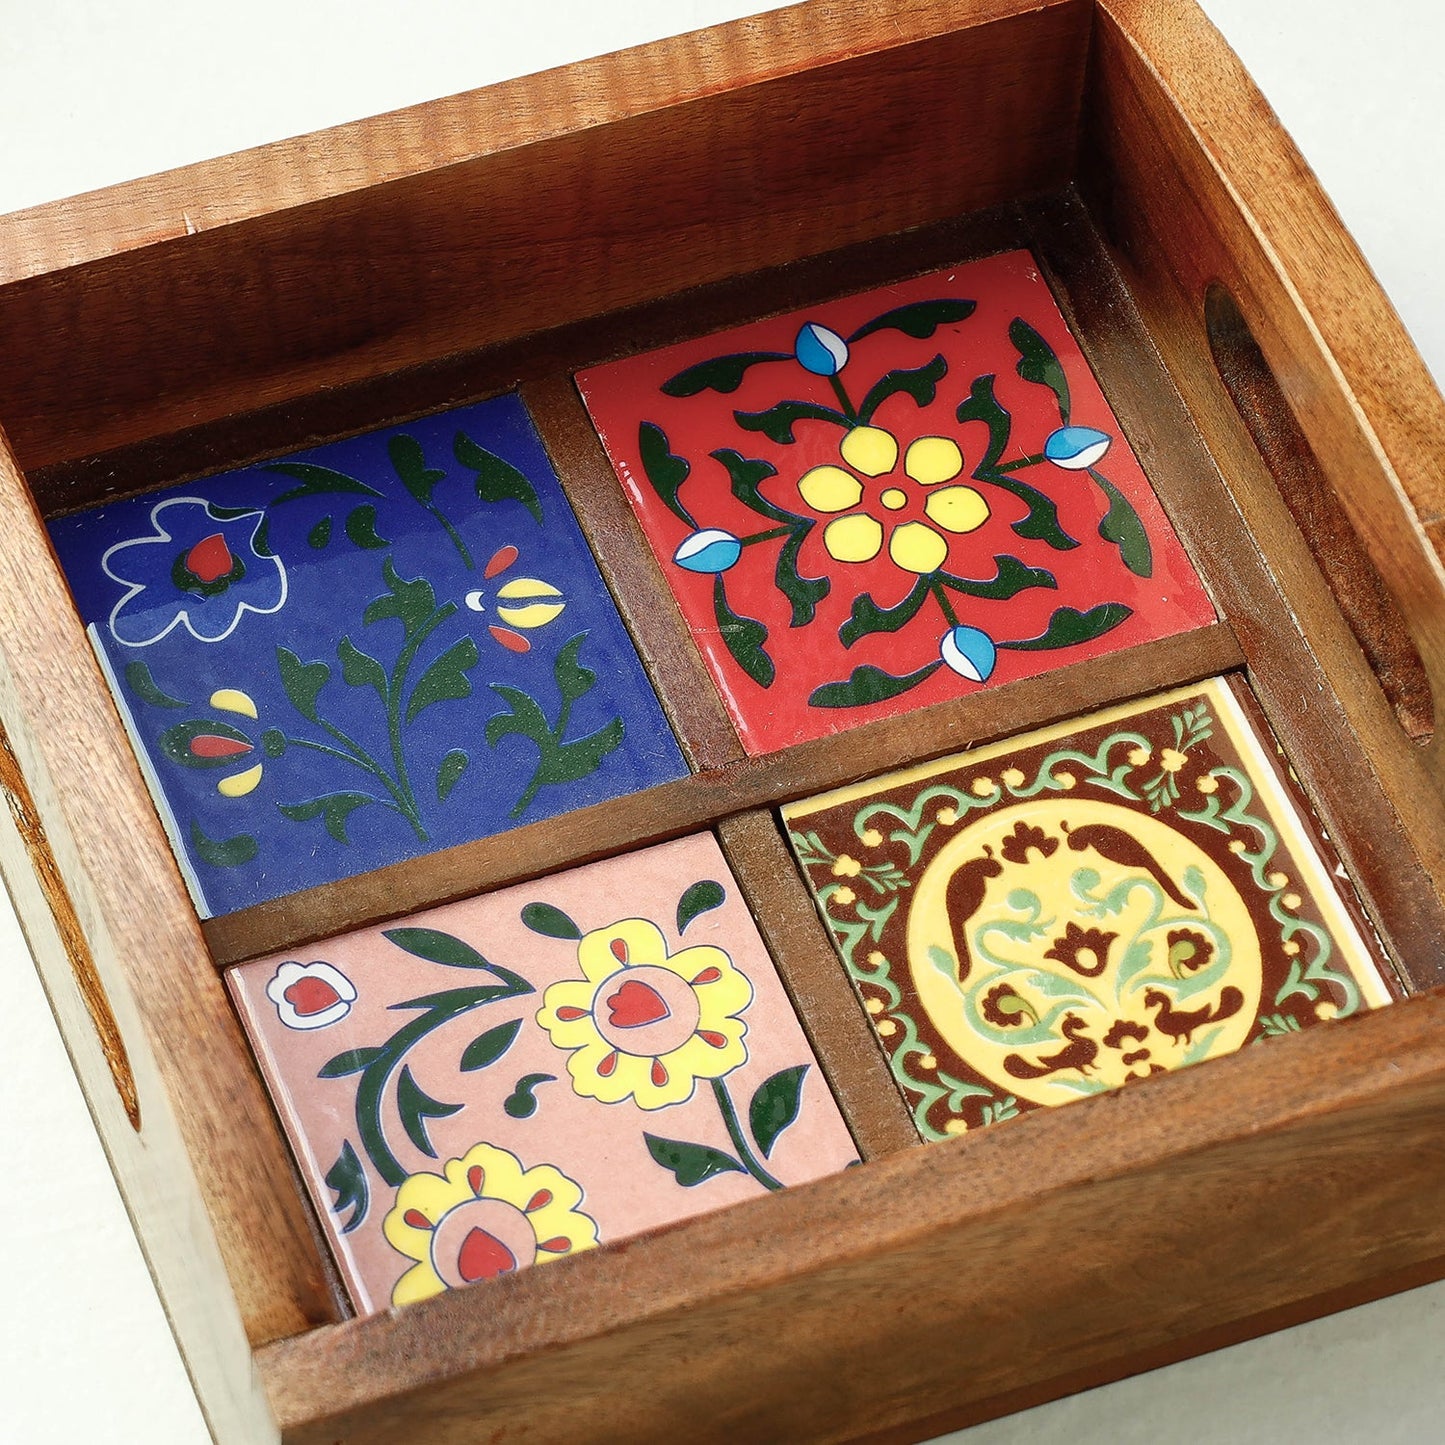 Wooden Serving Tray with Blue Pottery Ceramic Tiles (8 x 8 in)